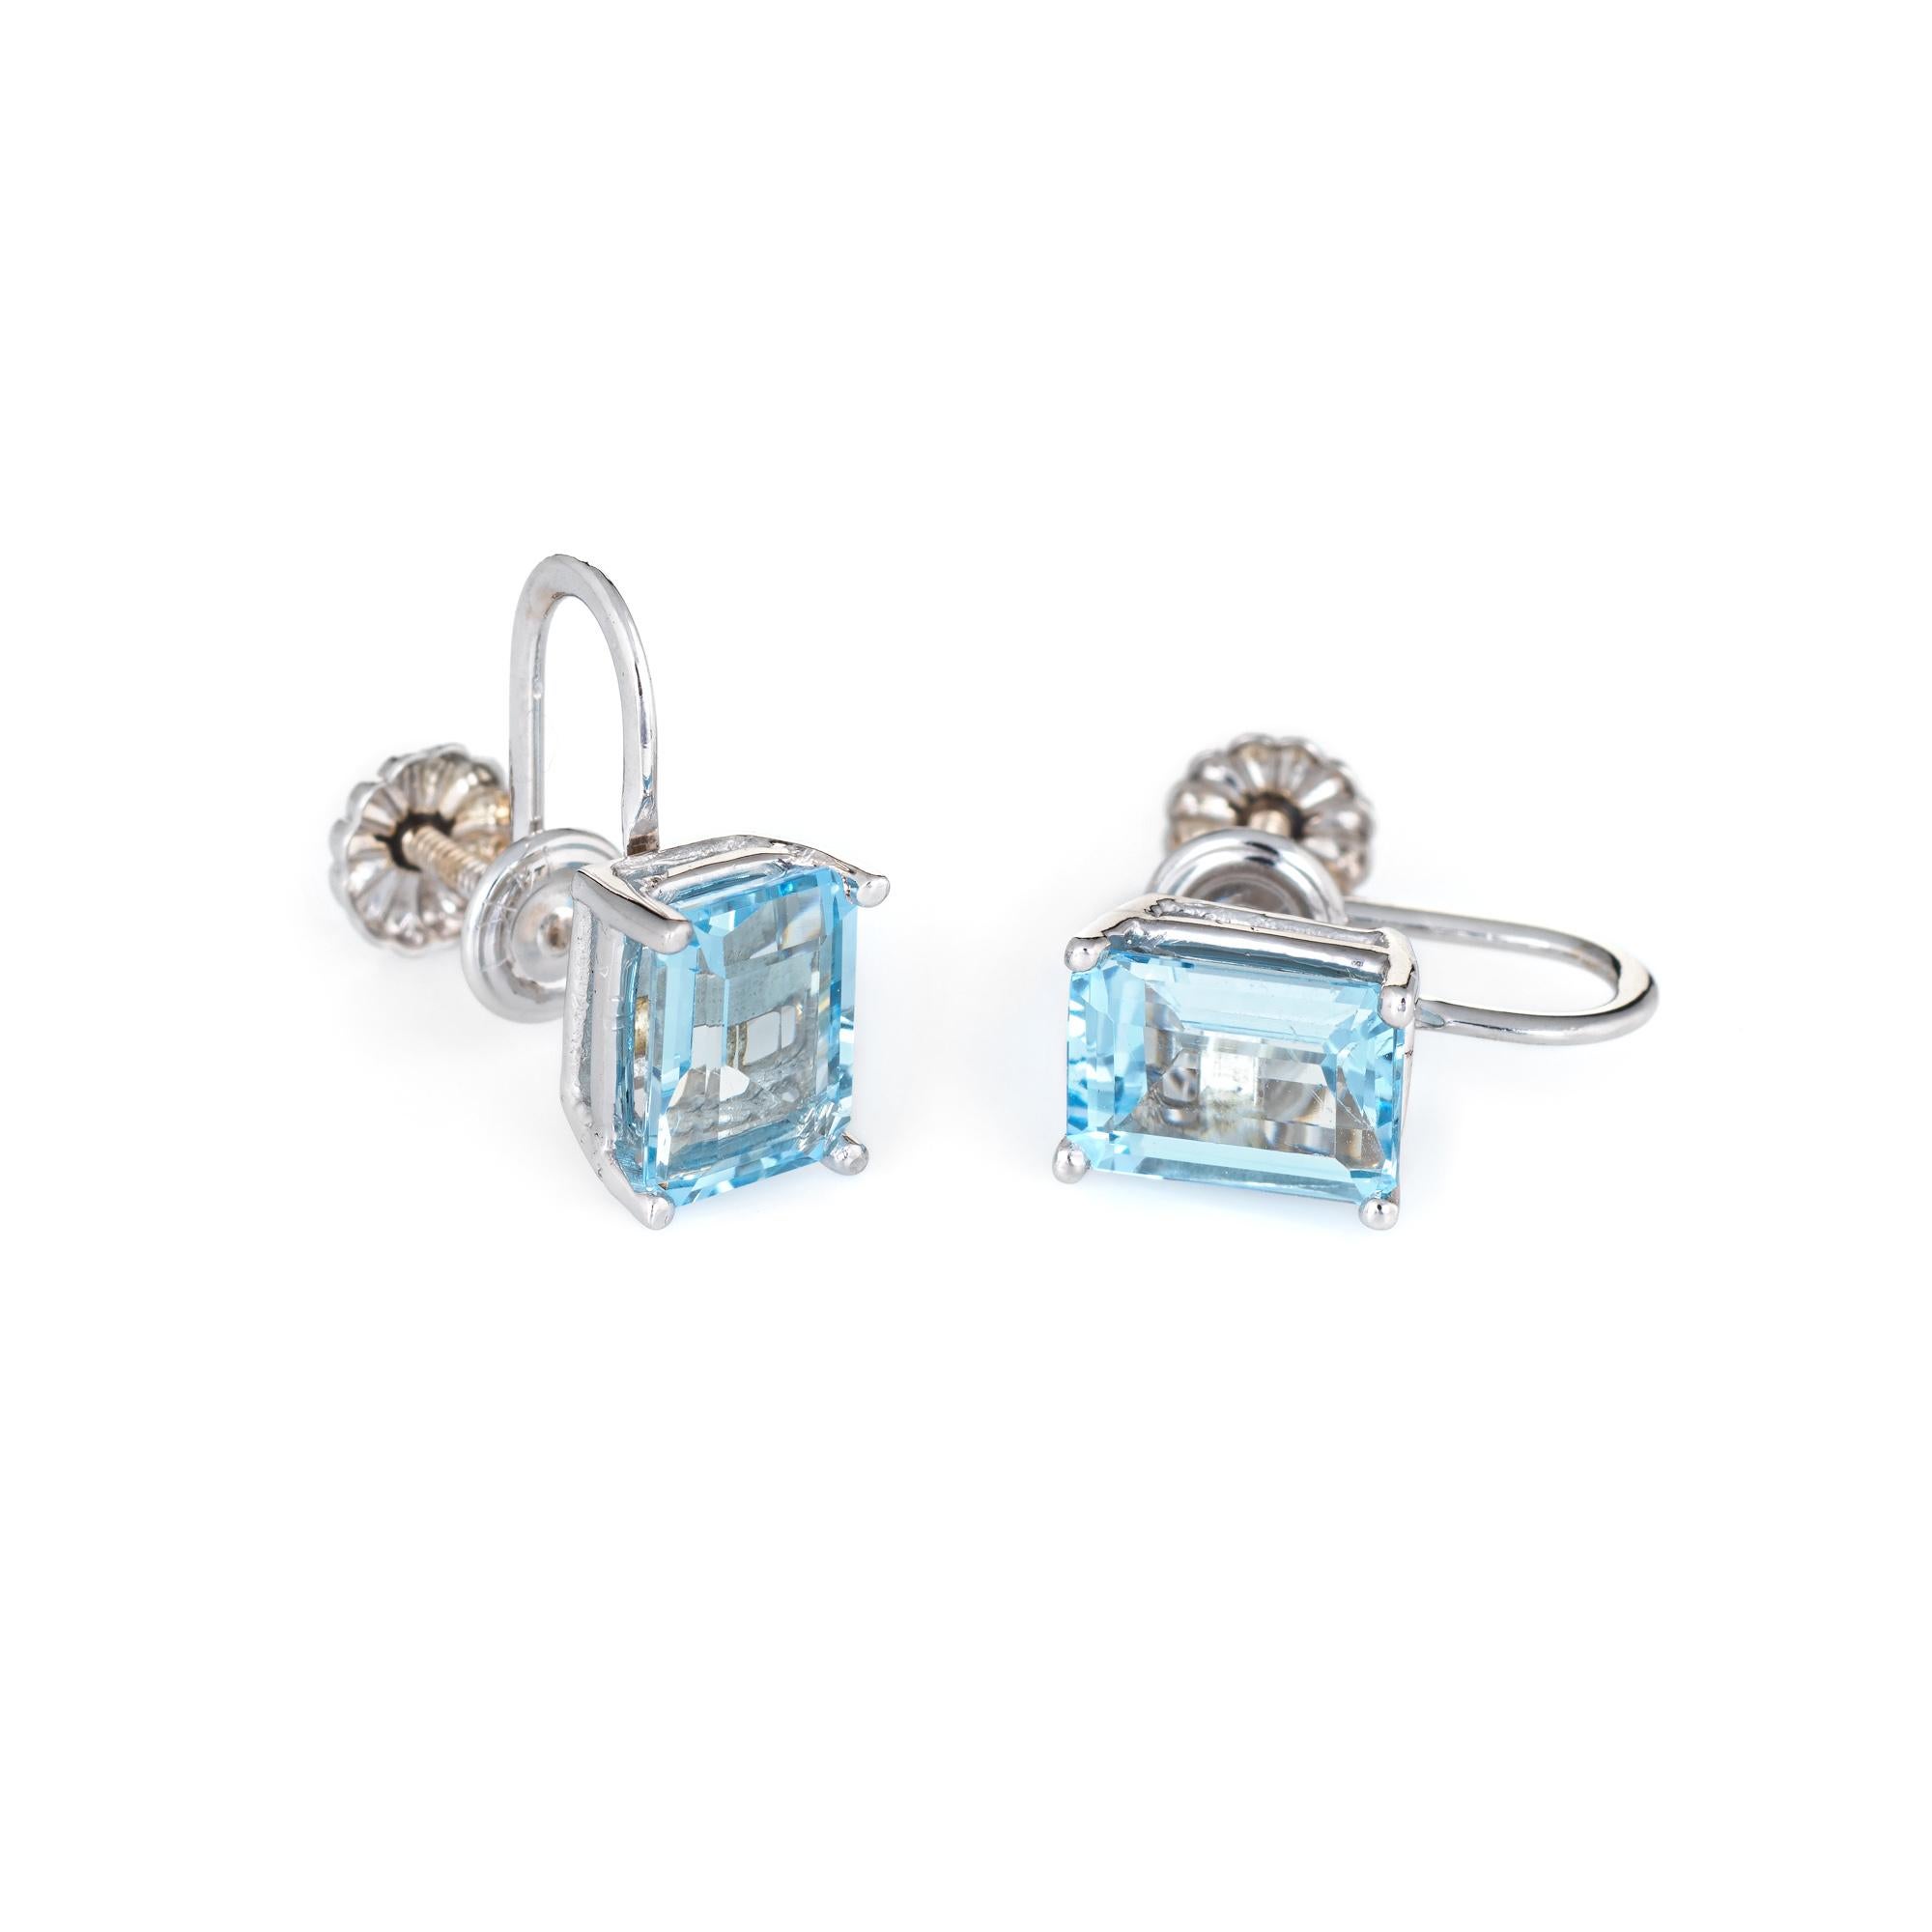 Elegant pair of blue topaz earrings crafted in 14k white gold. 

Emerald cut blue topaz measures 8mm x 6mm (estimated at 1.50 carats each - 3 carats total estimated weight). The topaz is in excellent condition and free of cracks or chips.   

The